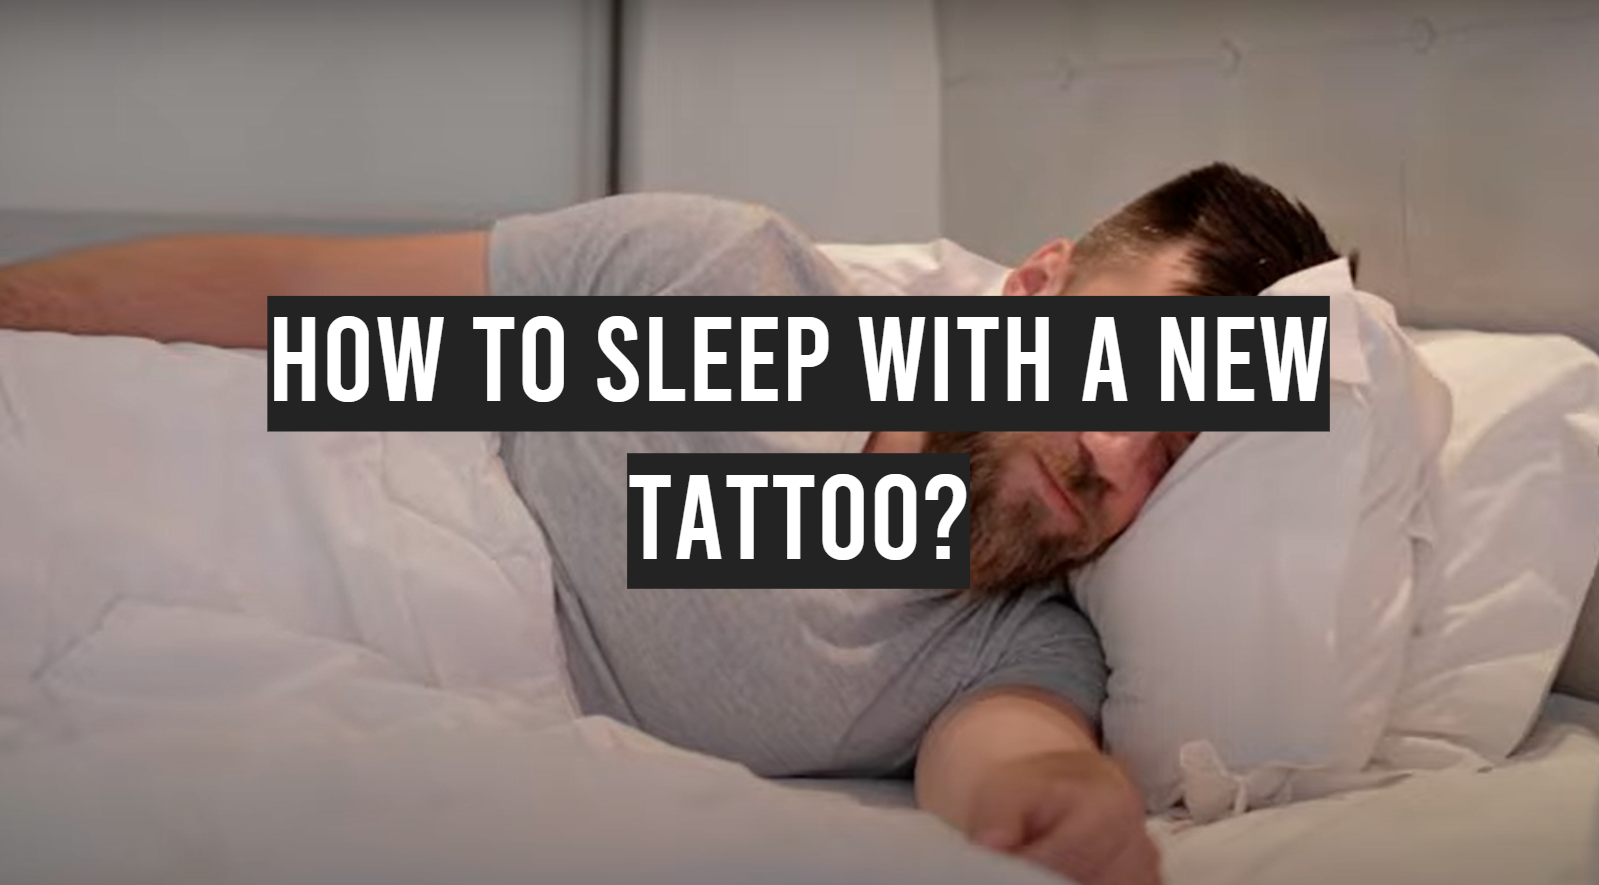 How to Sleep With a New Tattoo?